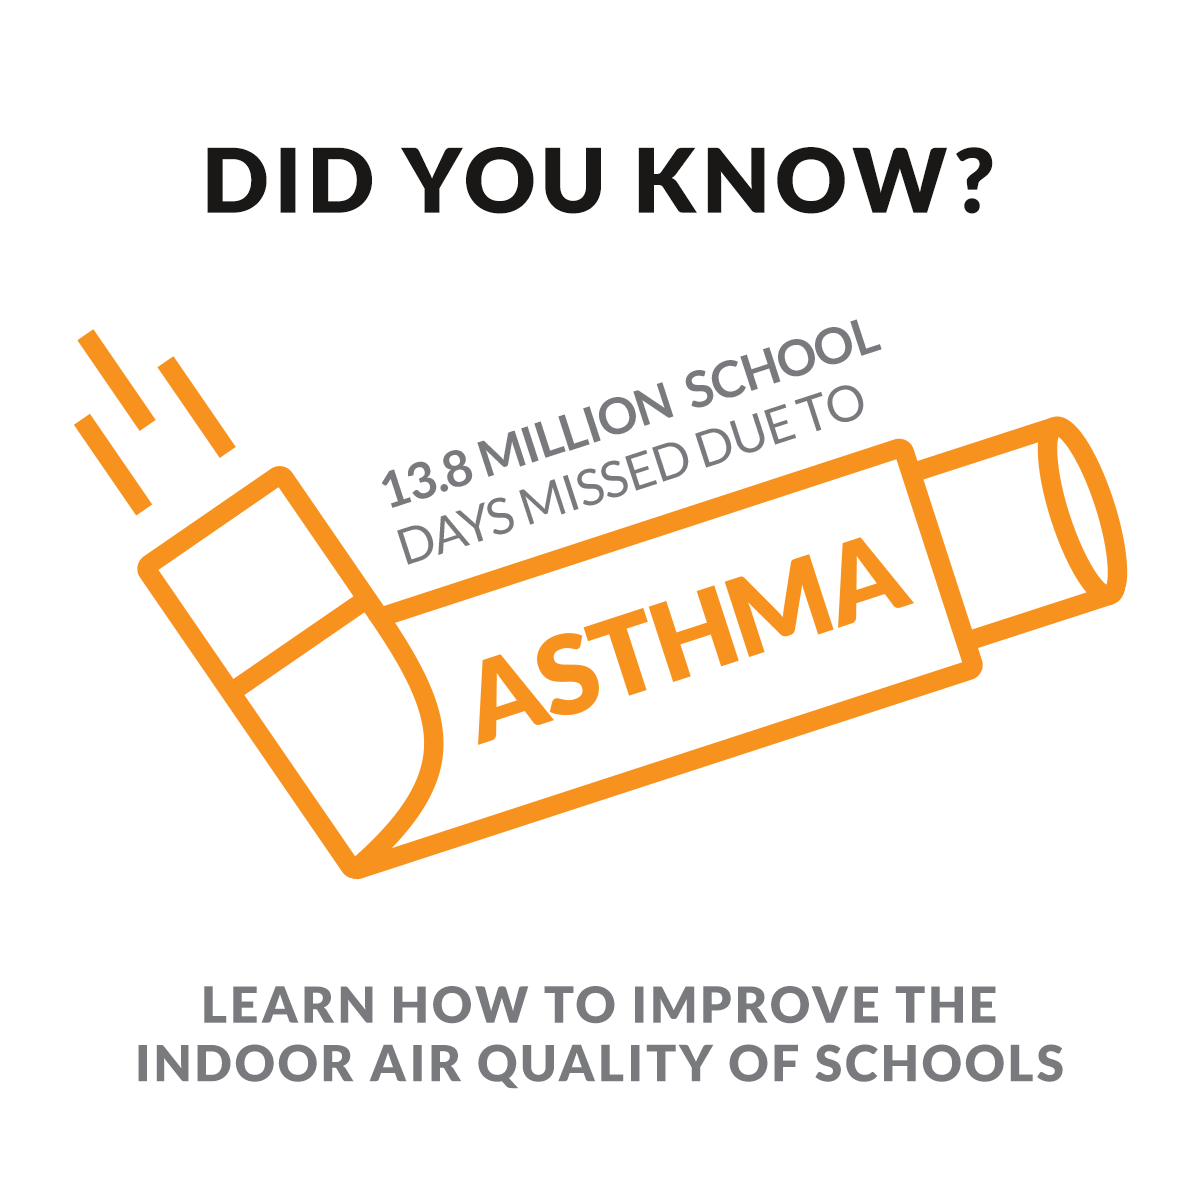 Did you know? 13.8 million school days are missed due to asthma. Learn how to improve the air quality of your schools.